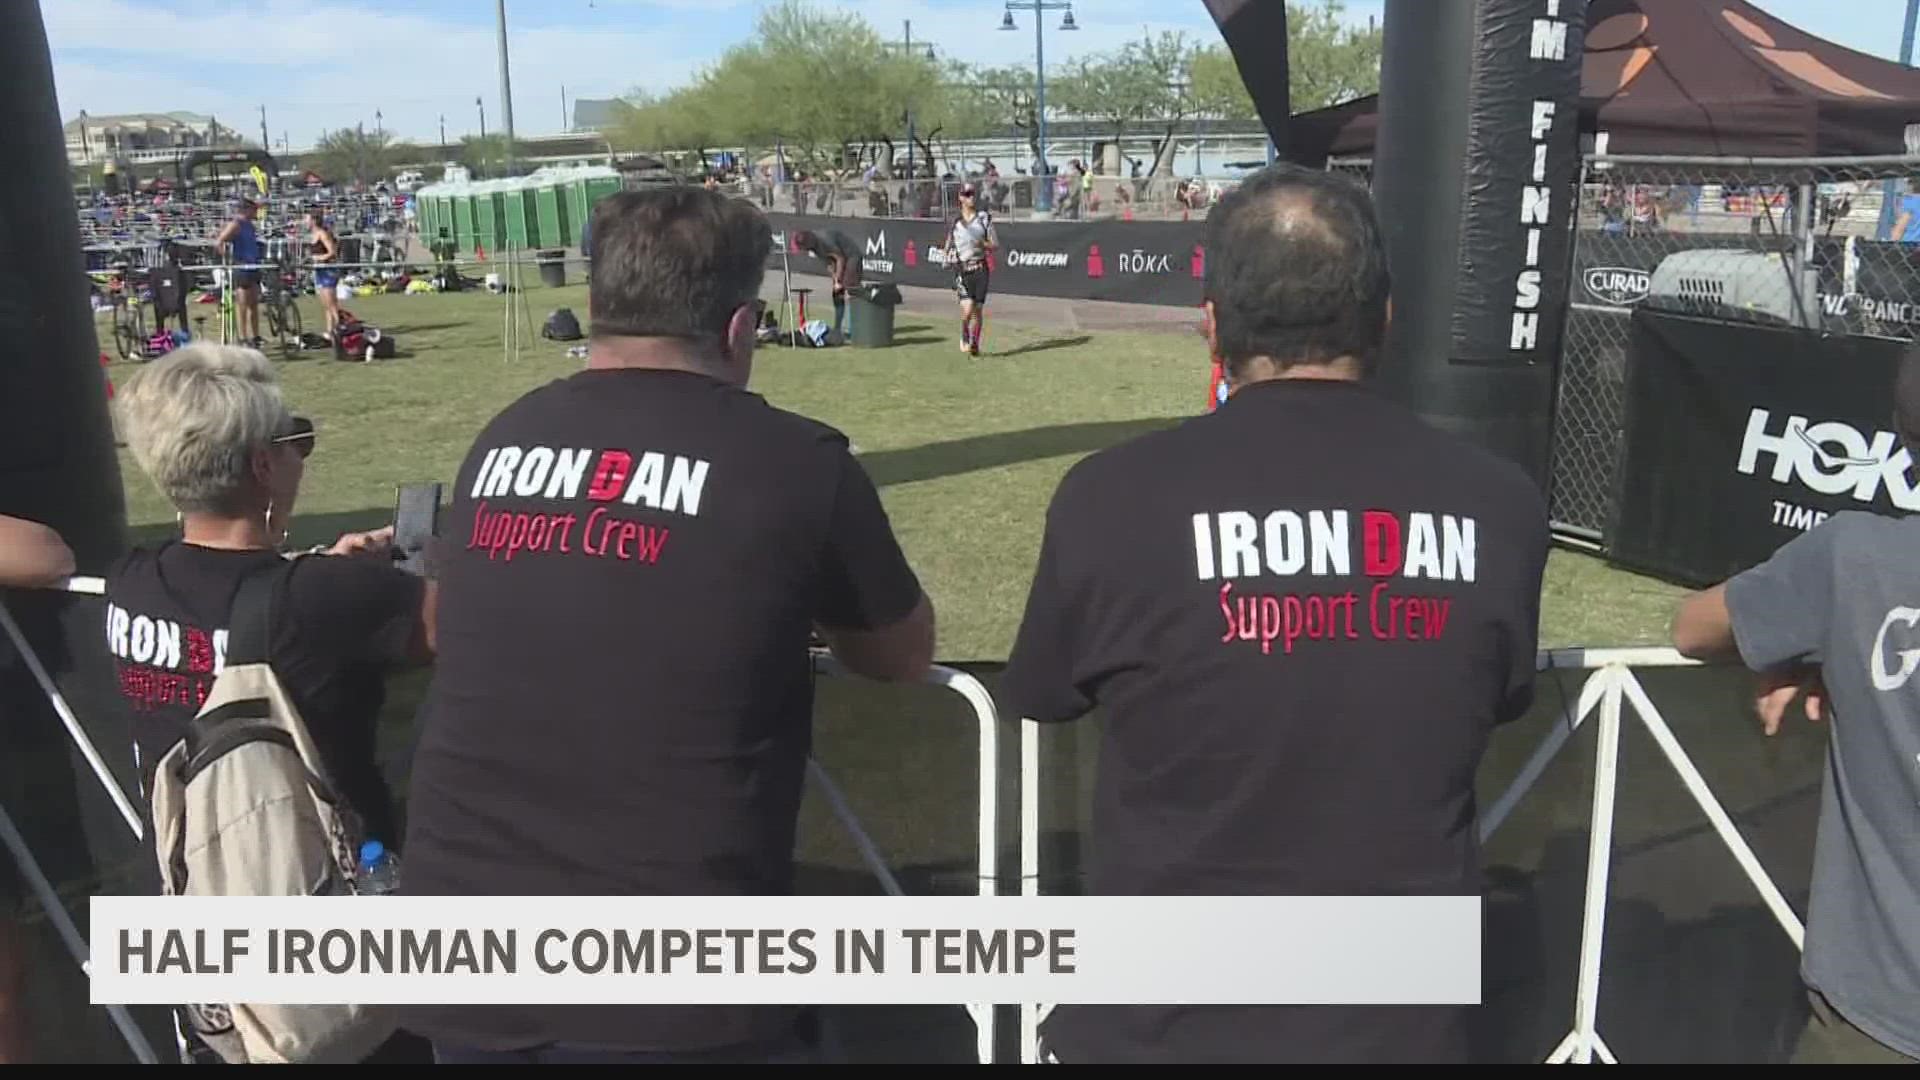 The area around Tempe Town Lake was packed all day Saturday, as people were either sweating it out on the course or screaming on the sidelines.